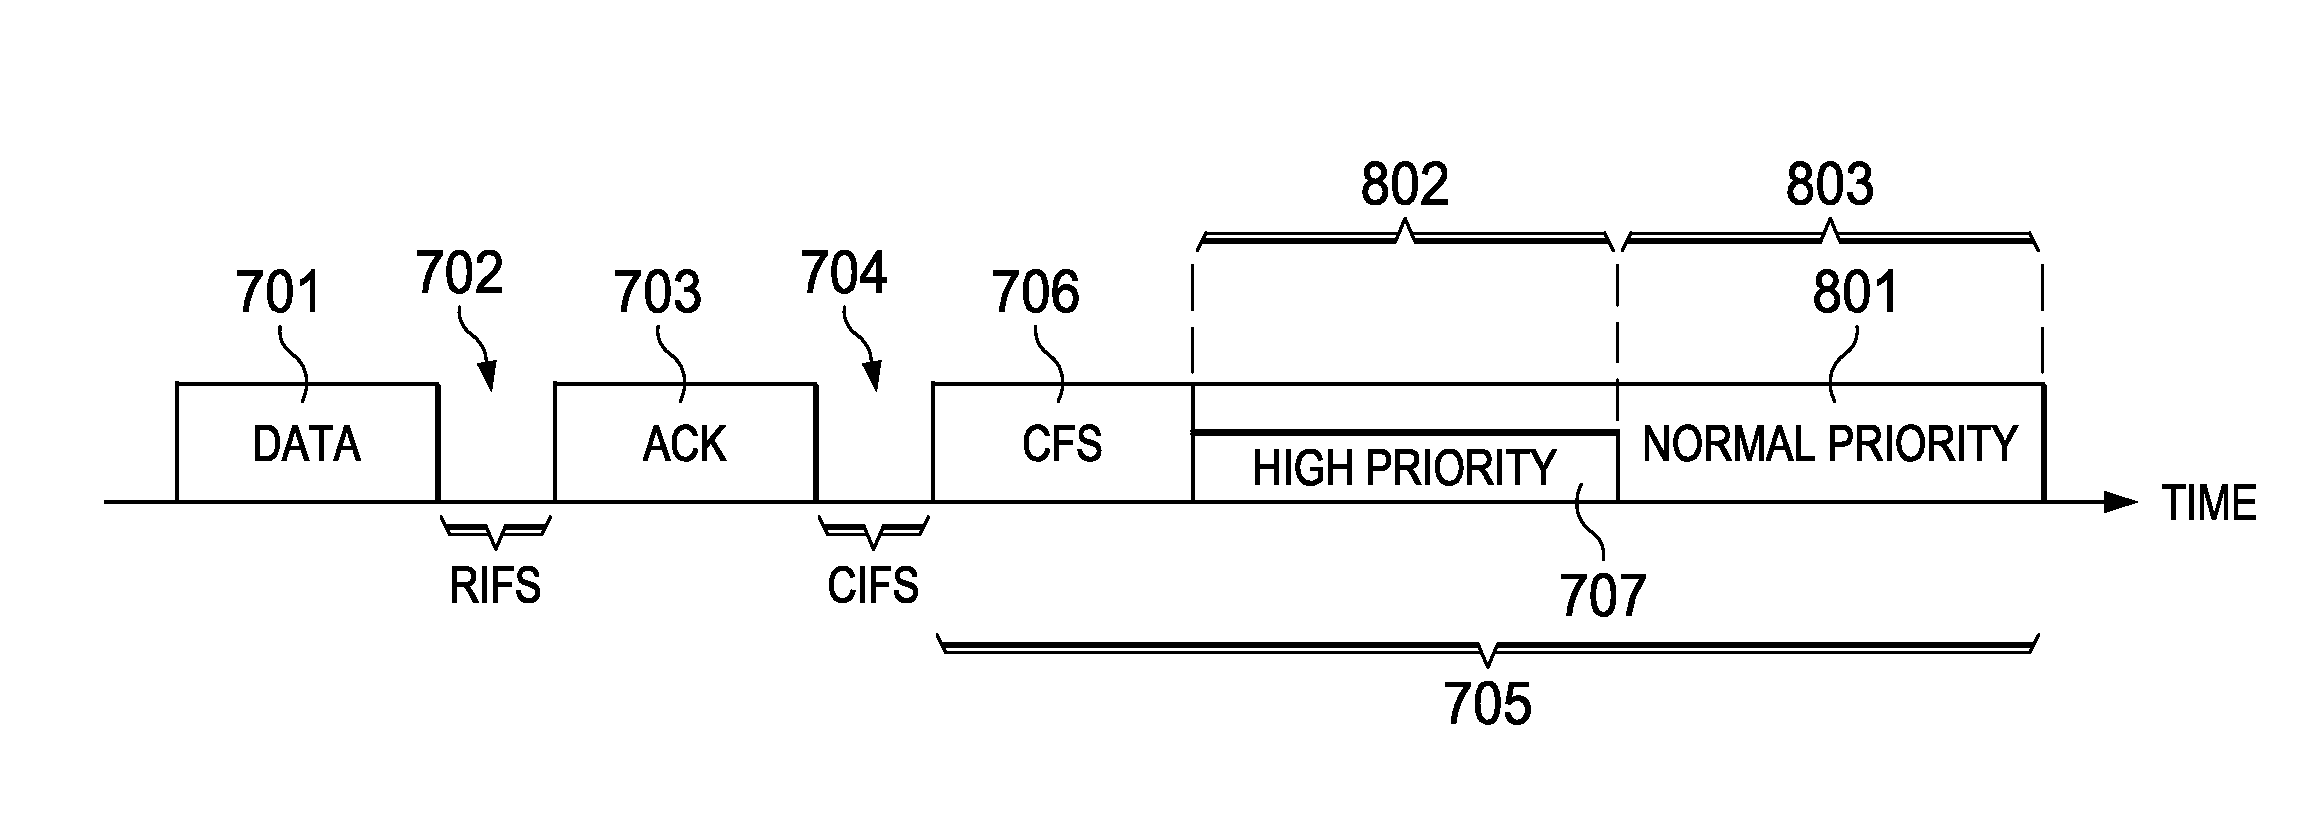 Overlapping priority contention windows for G3 power line communications networks